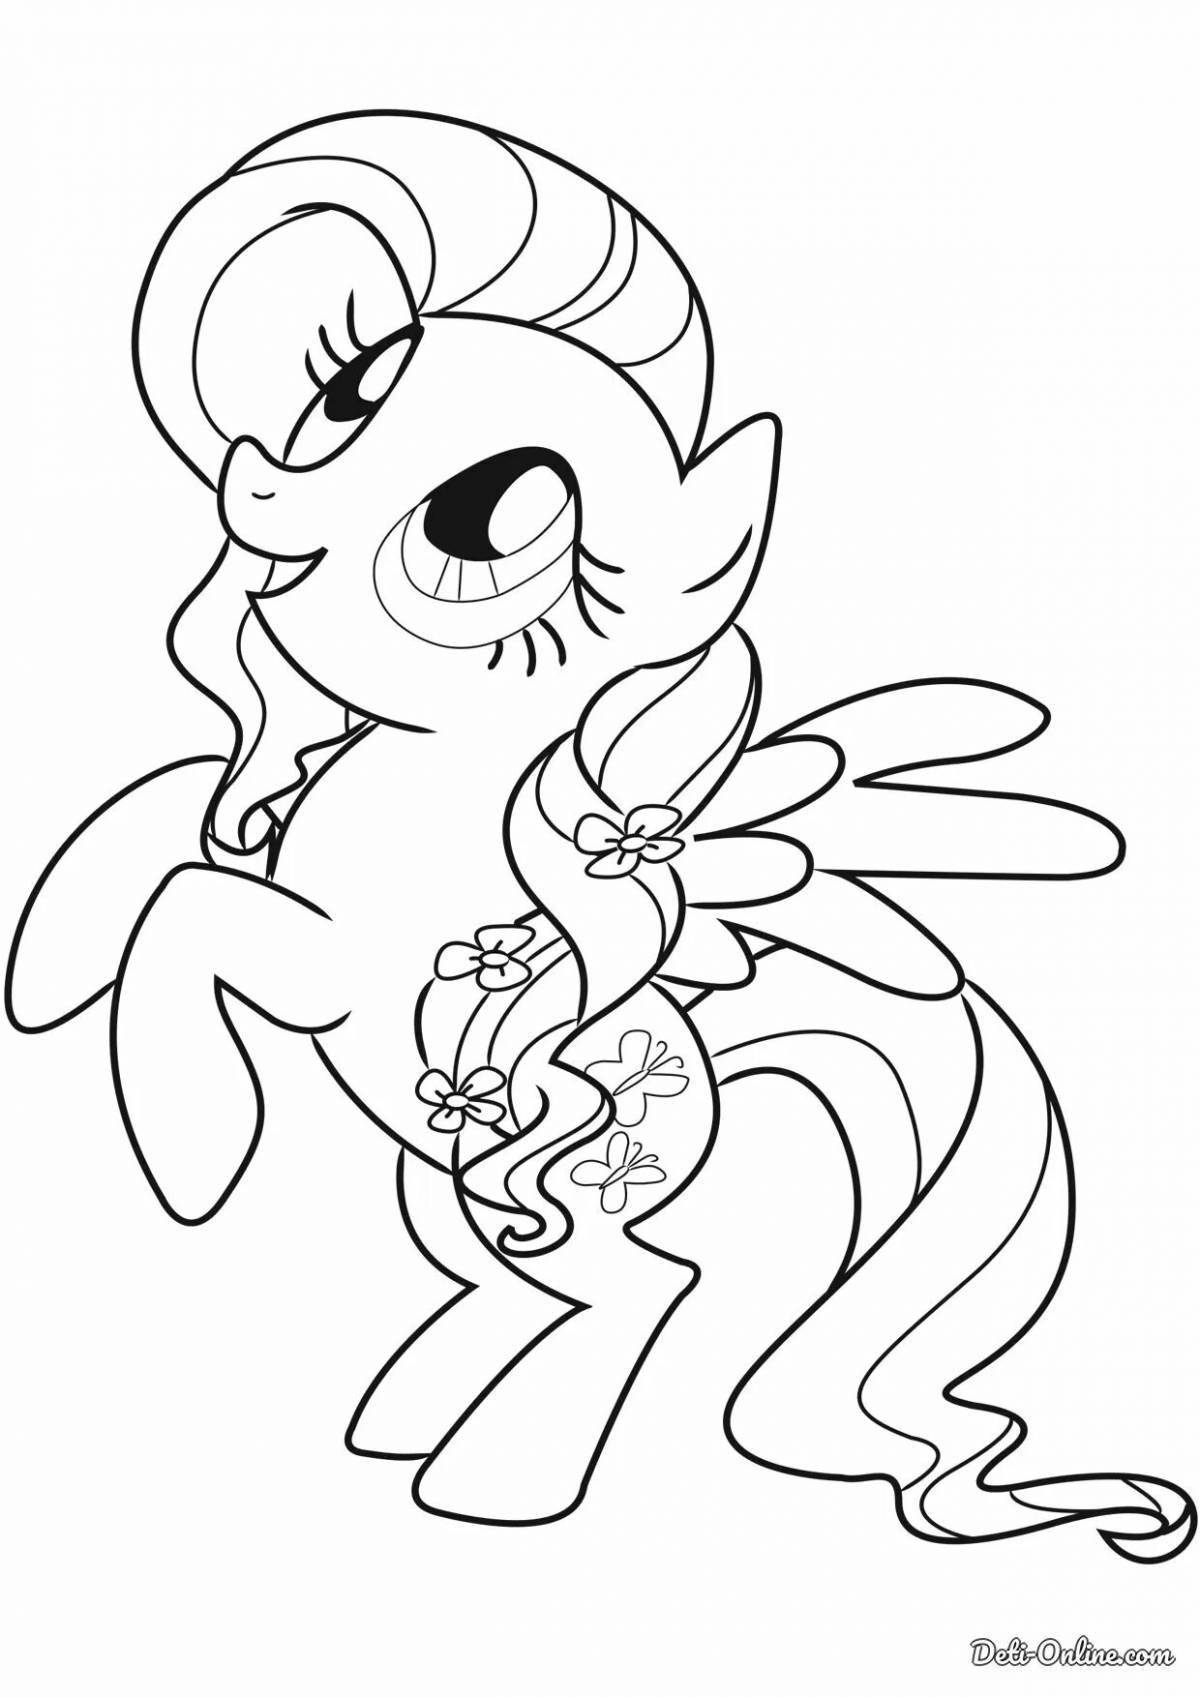 Great pony watershine coloring page